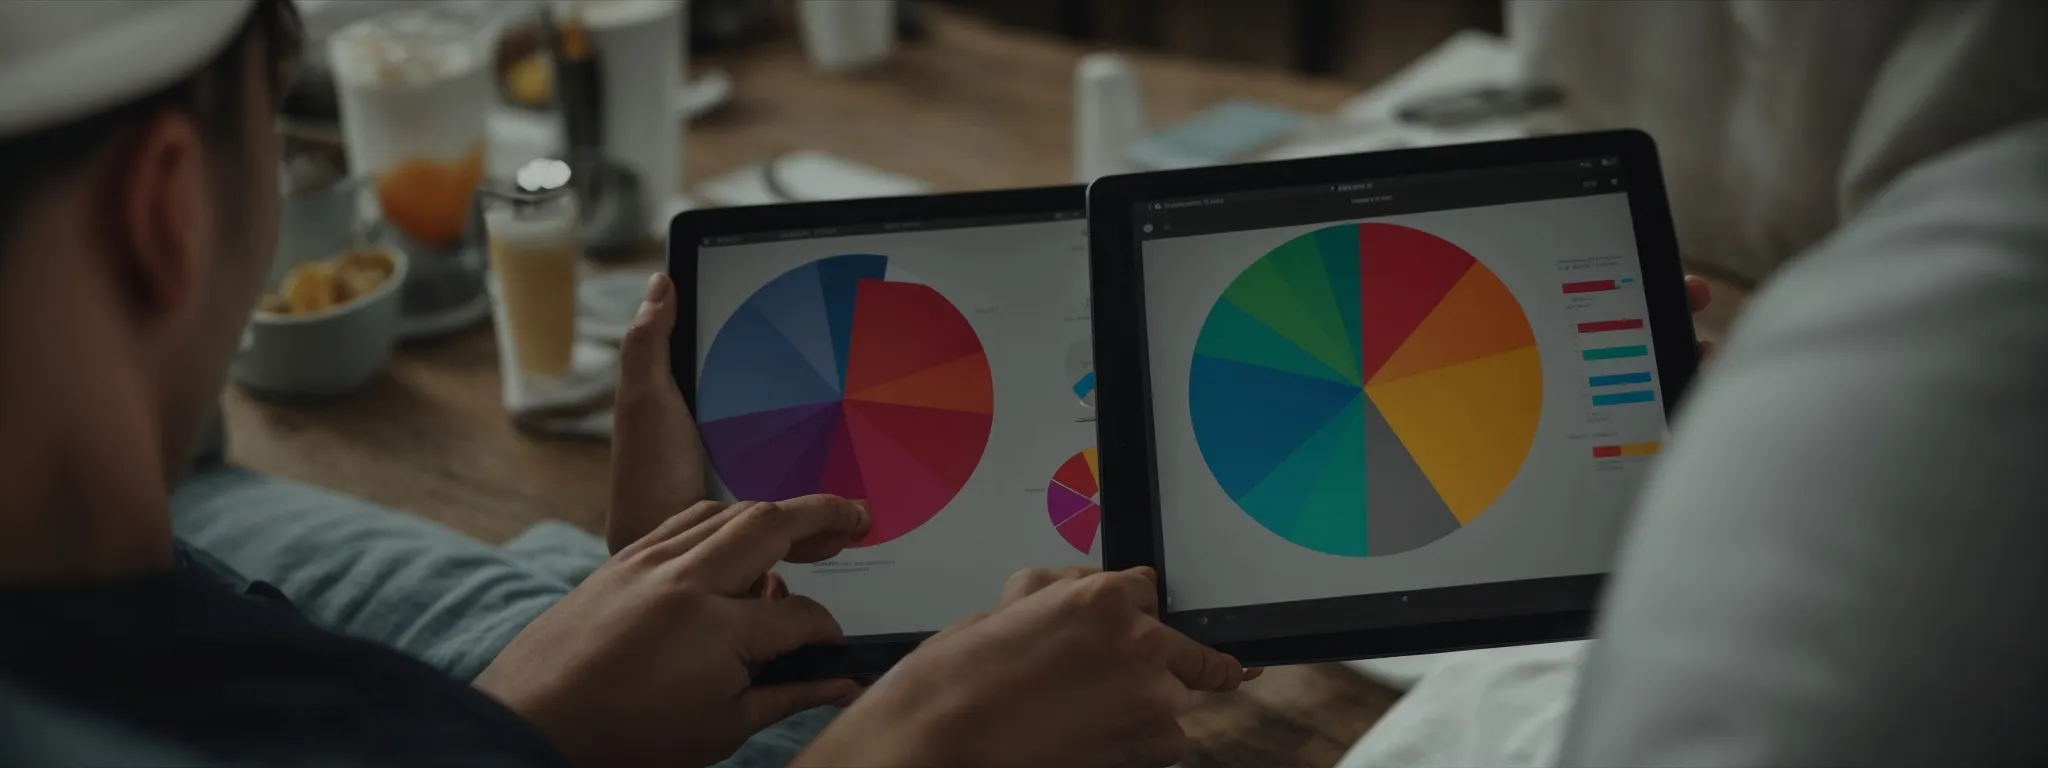 a vendor analyzing a colorfully detailed pie chart on a digital tablet, representing different aspects of amazon seo optimization.